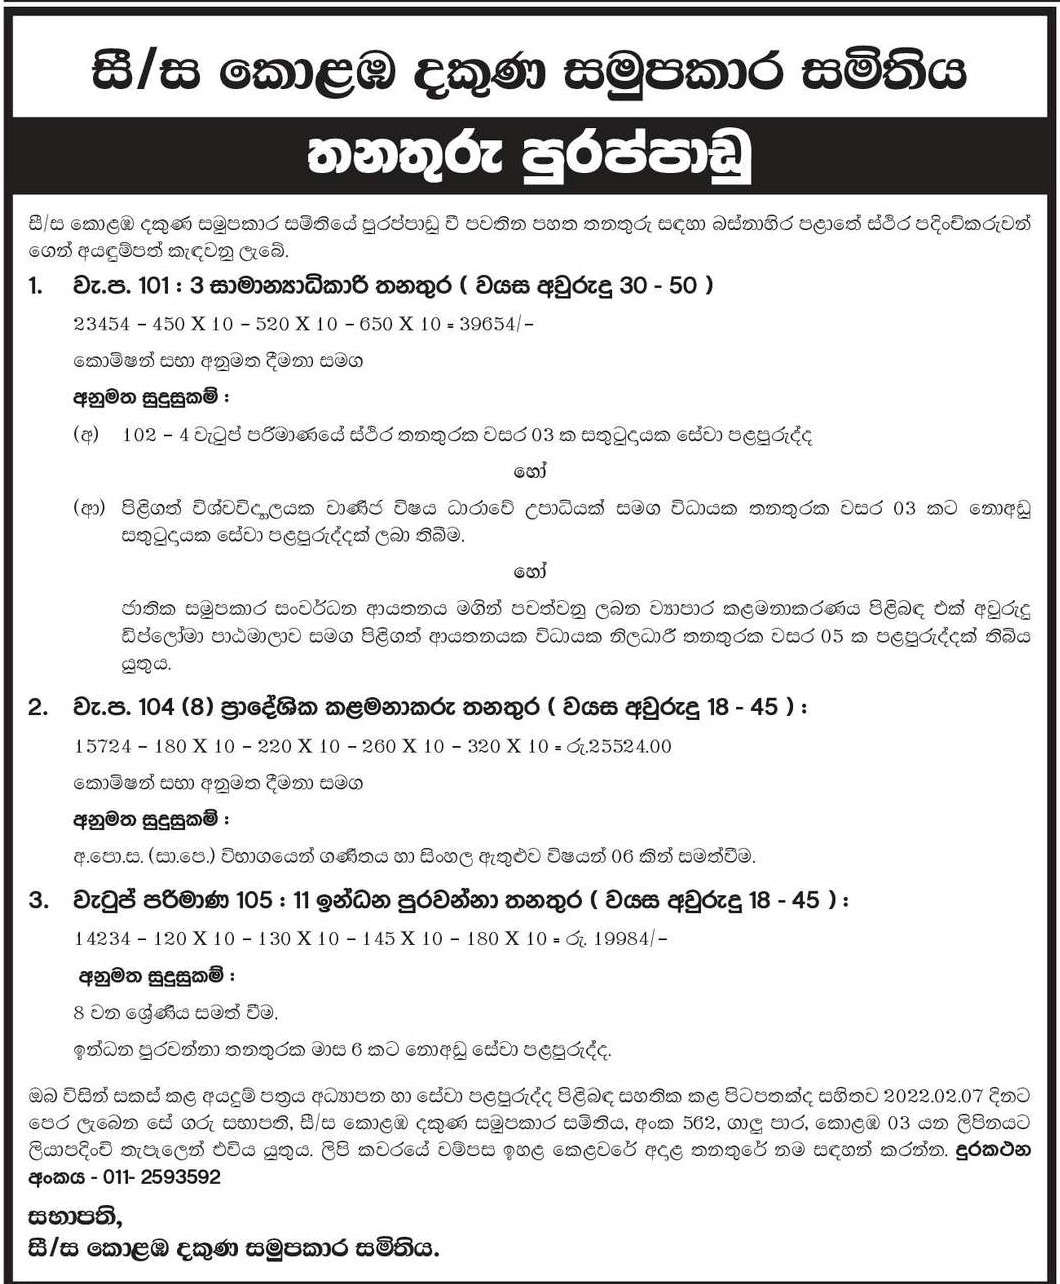 General Manager, Regional Manager, Fuel Filler - Colombo South Multi Purpose Cooperative Society Ltd